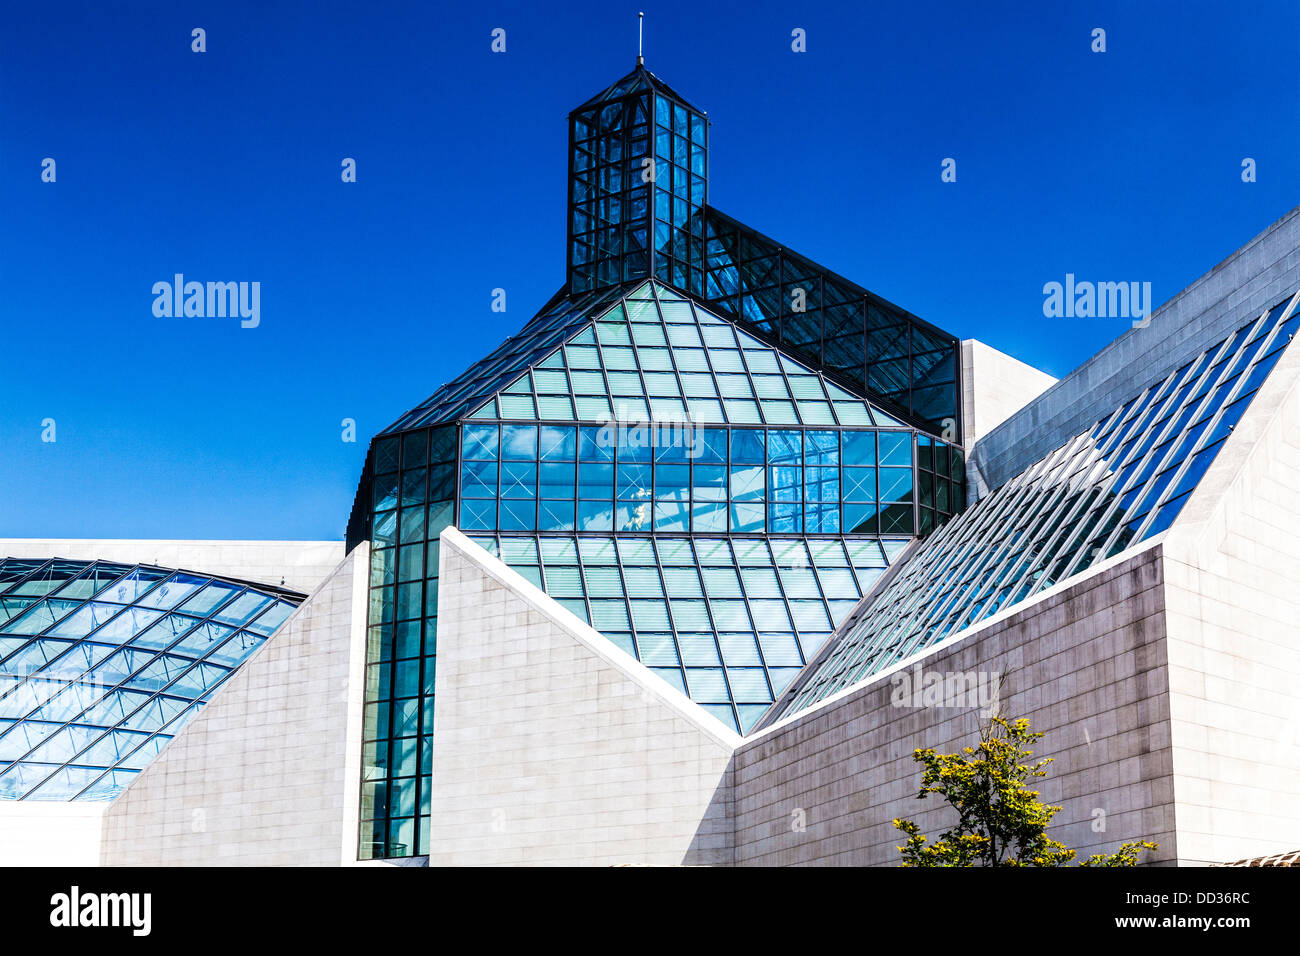 The Musée d'art moderne Grand-Duc Jean or MUDAM Museum of Modern Art in the  Kirchberg district of Luxembourg City Stock Photo - Alamy